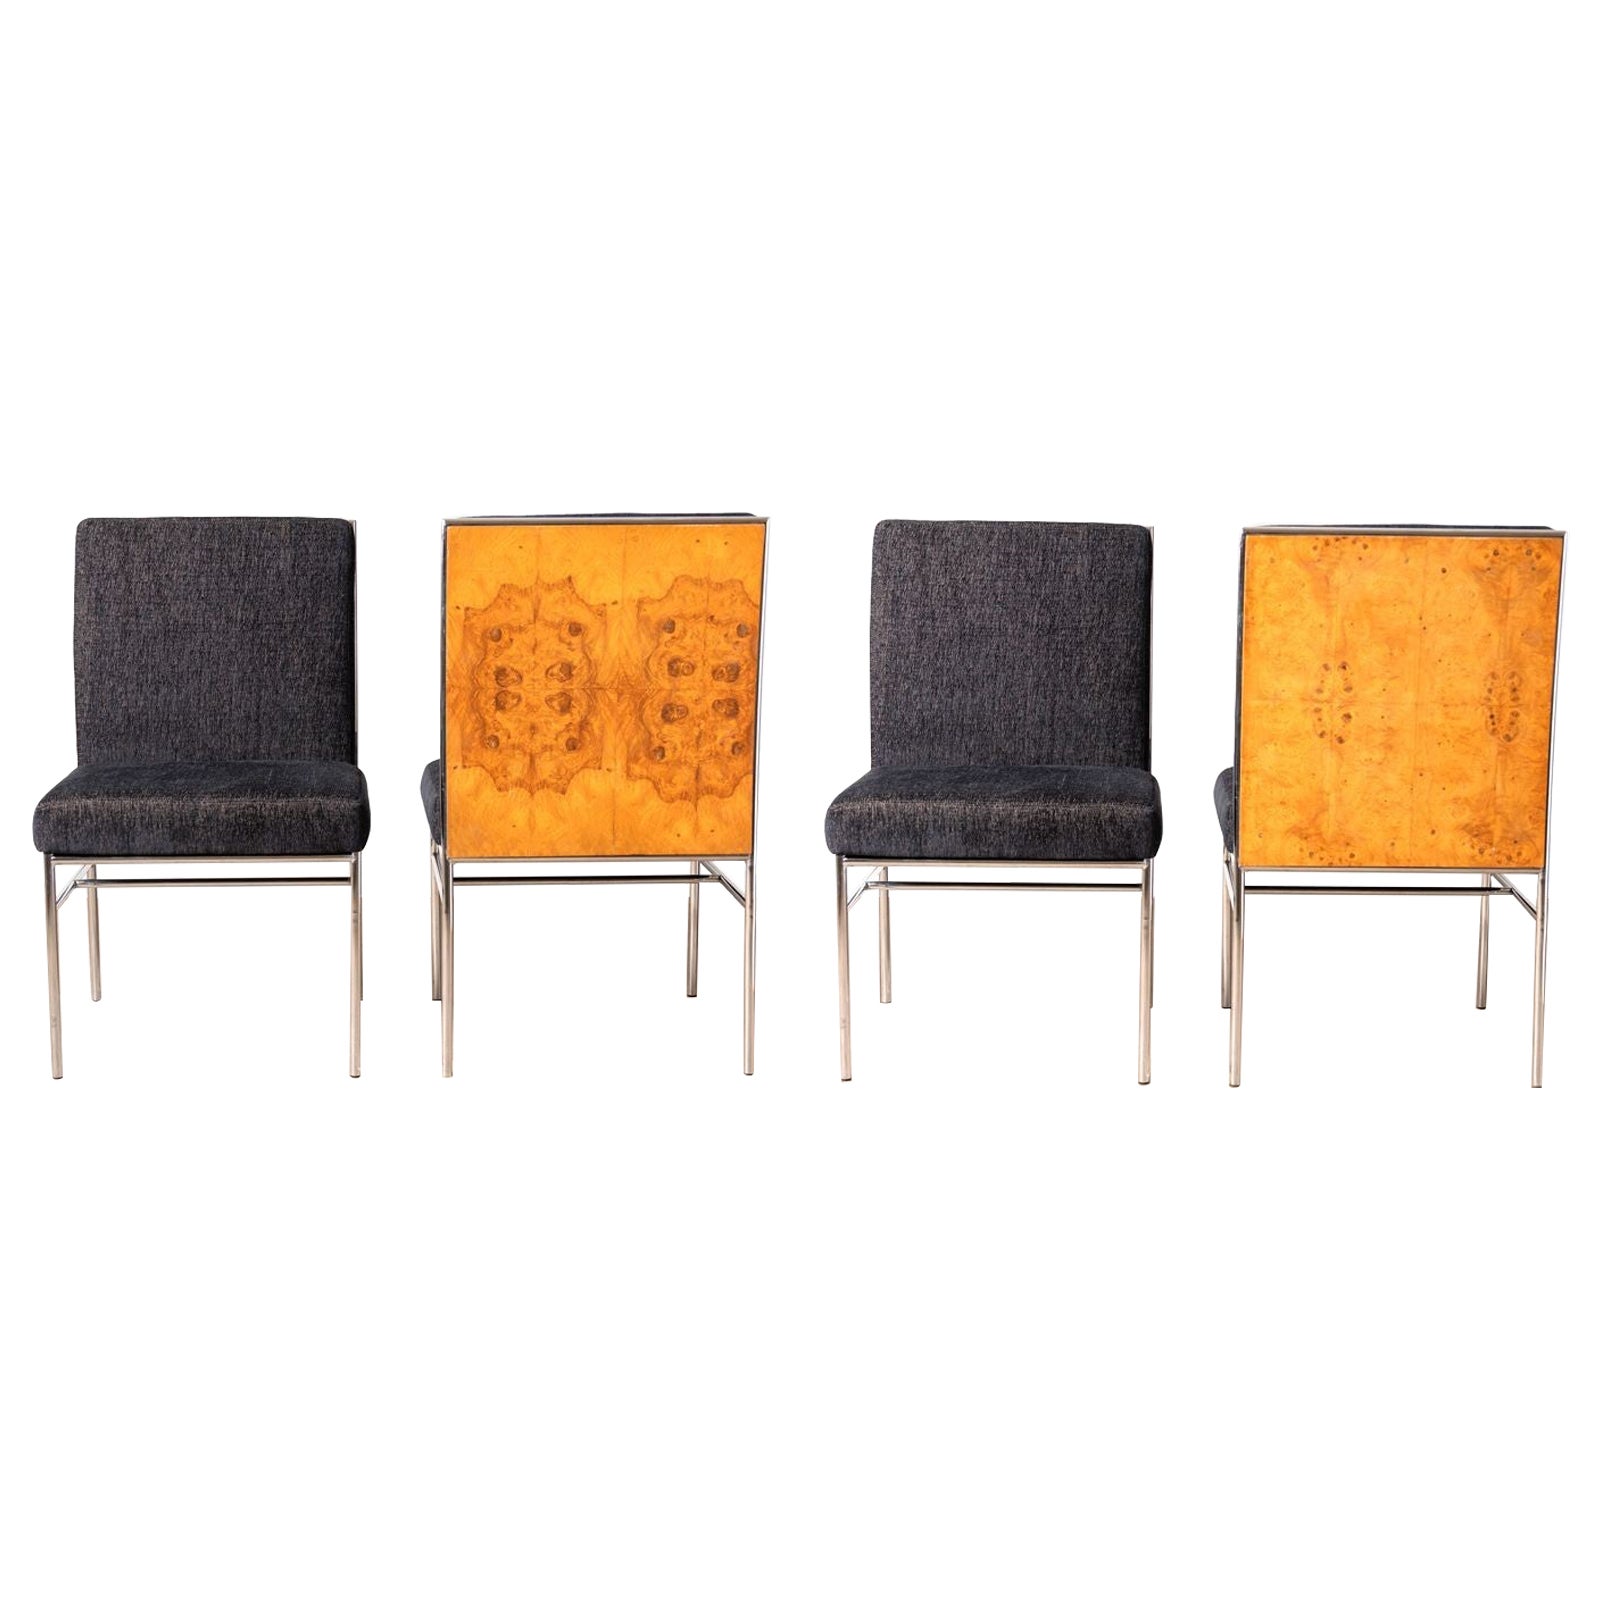 Milo Baughman Dining Chairs for Thayer Coggin in Olive Burlwood Set of Four 1970 For Sale